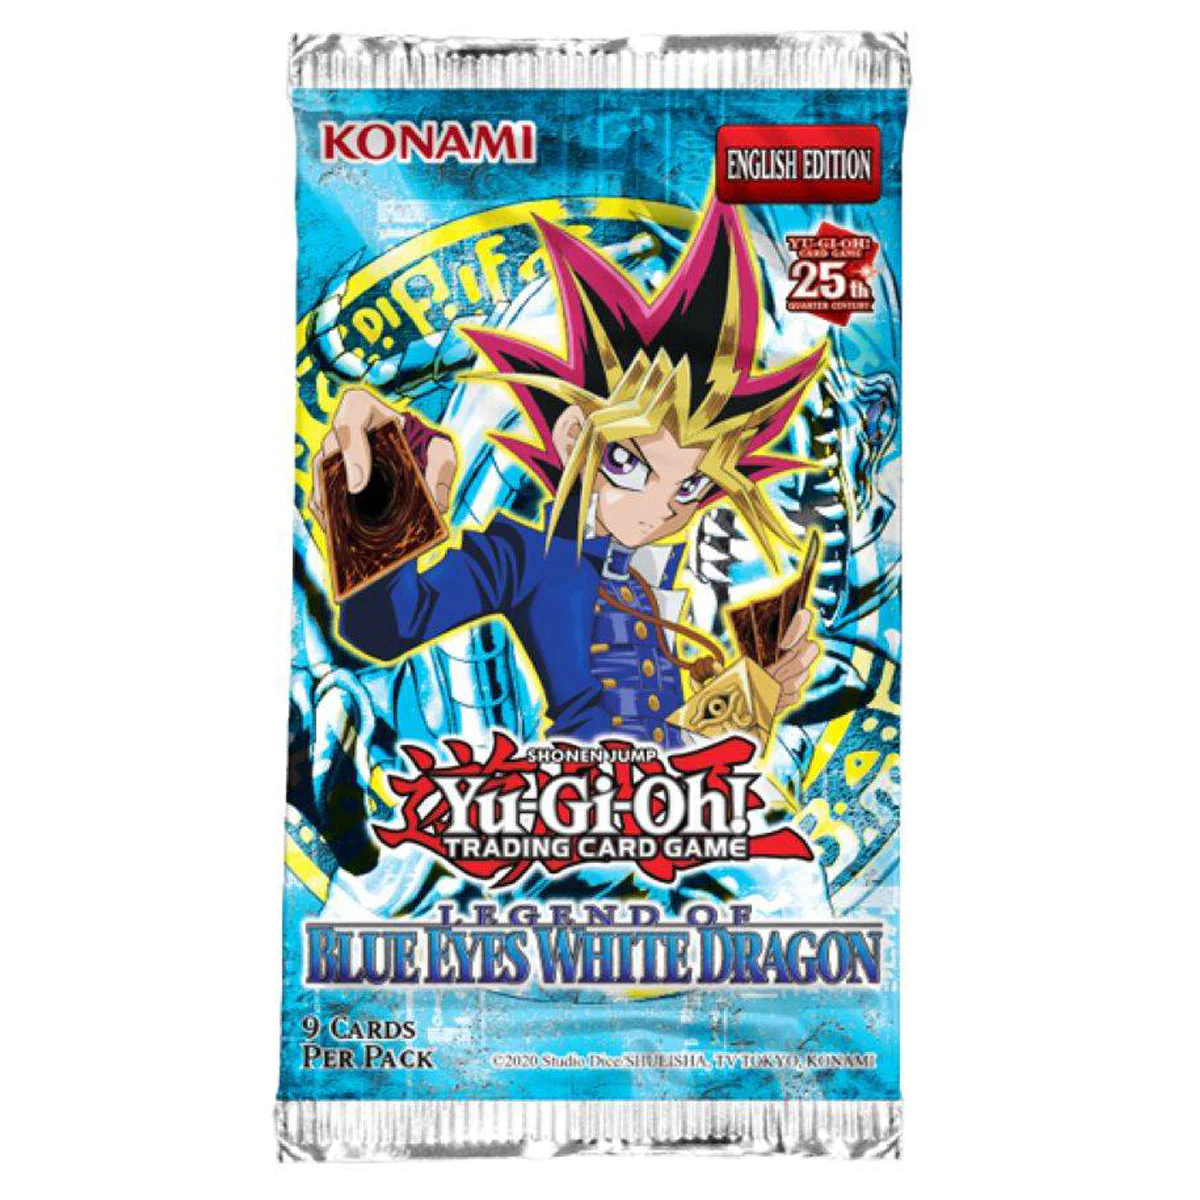 YuGiOh! Blue Eyes White Dragon Booster Box Legendary Collection 25th Anniversary